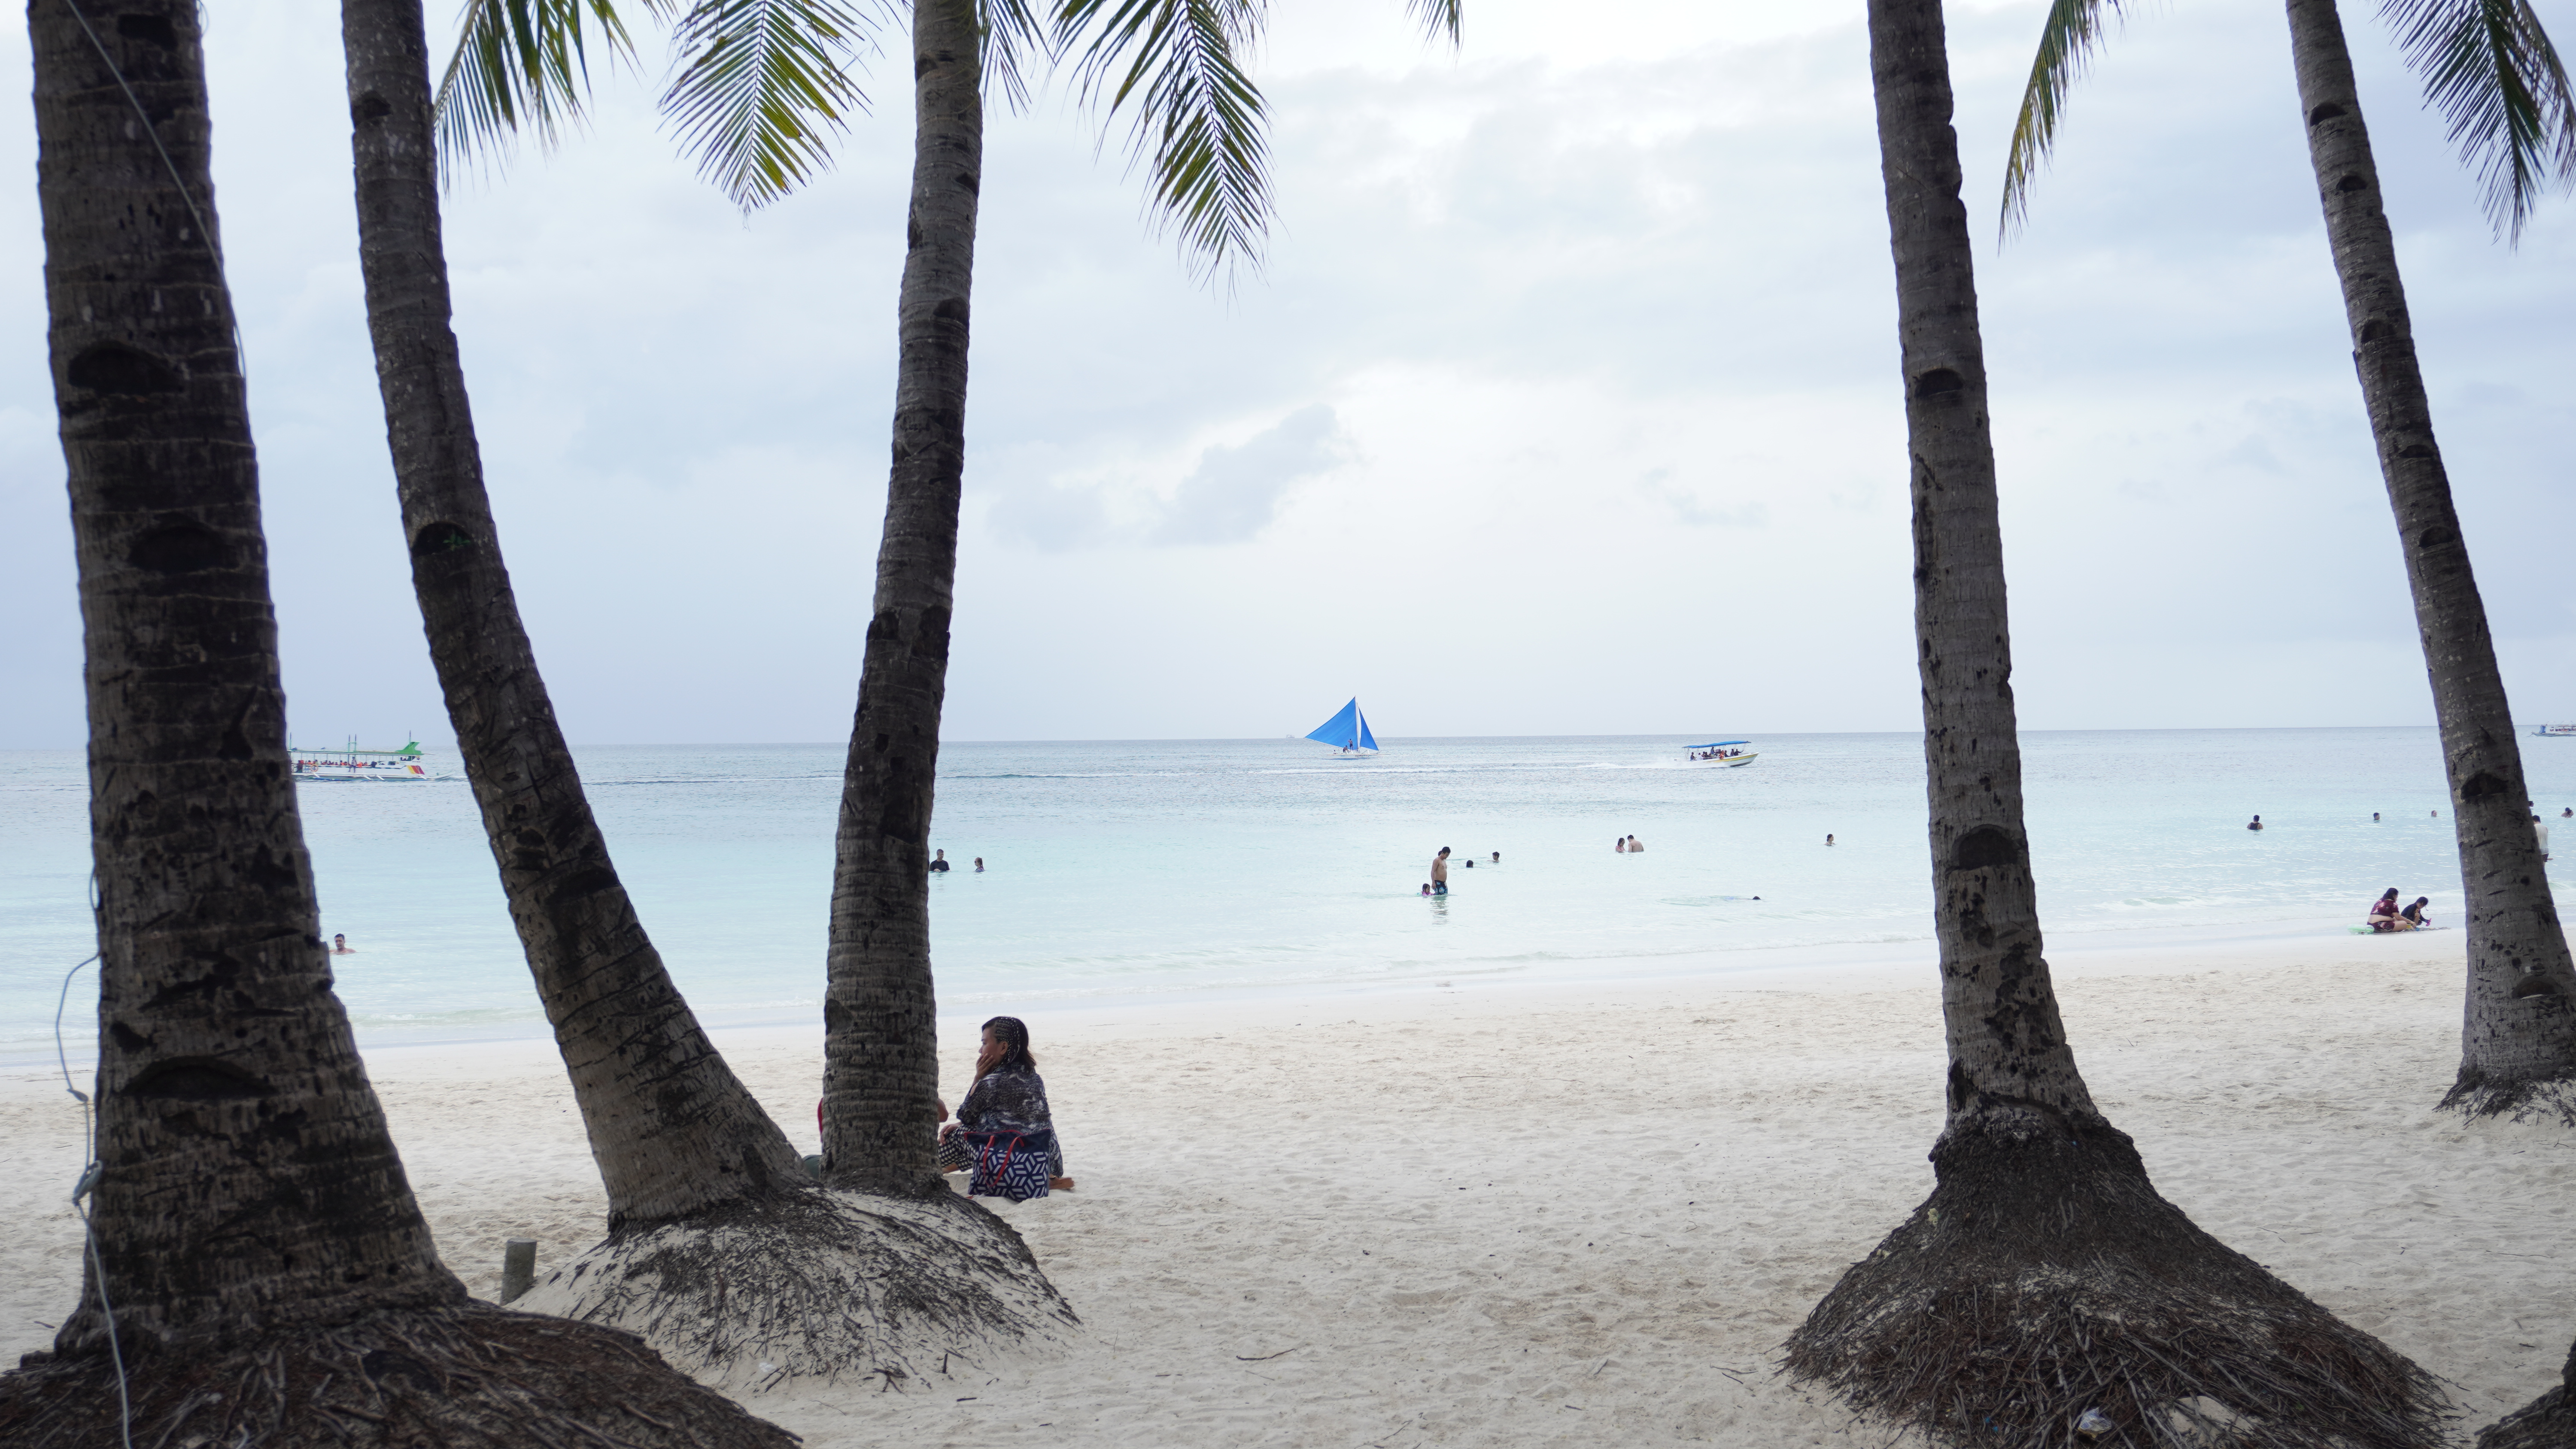 requirements for travel boracay